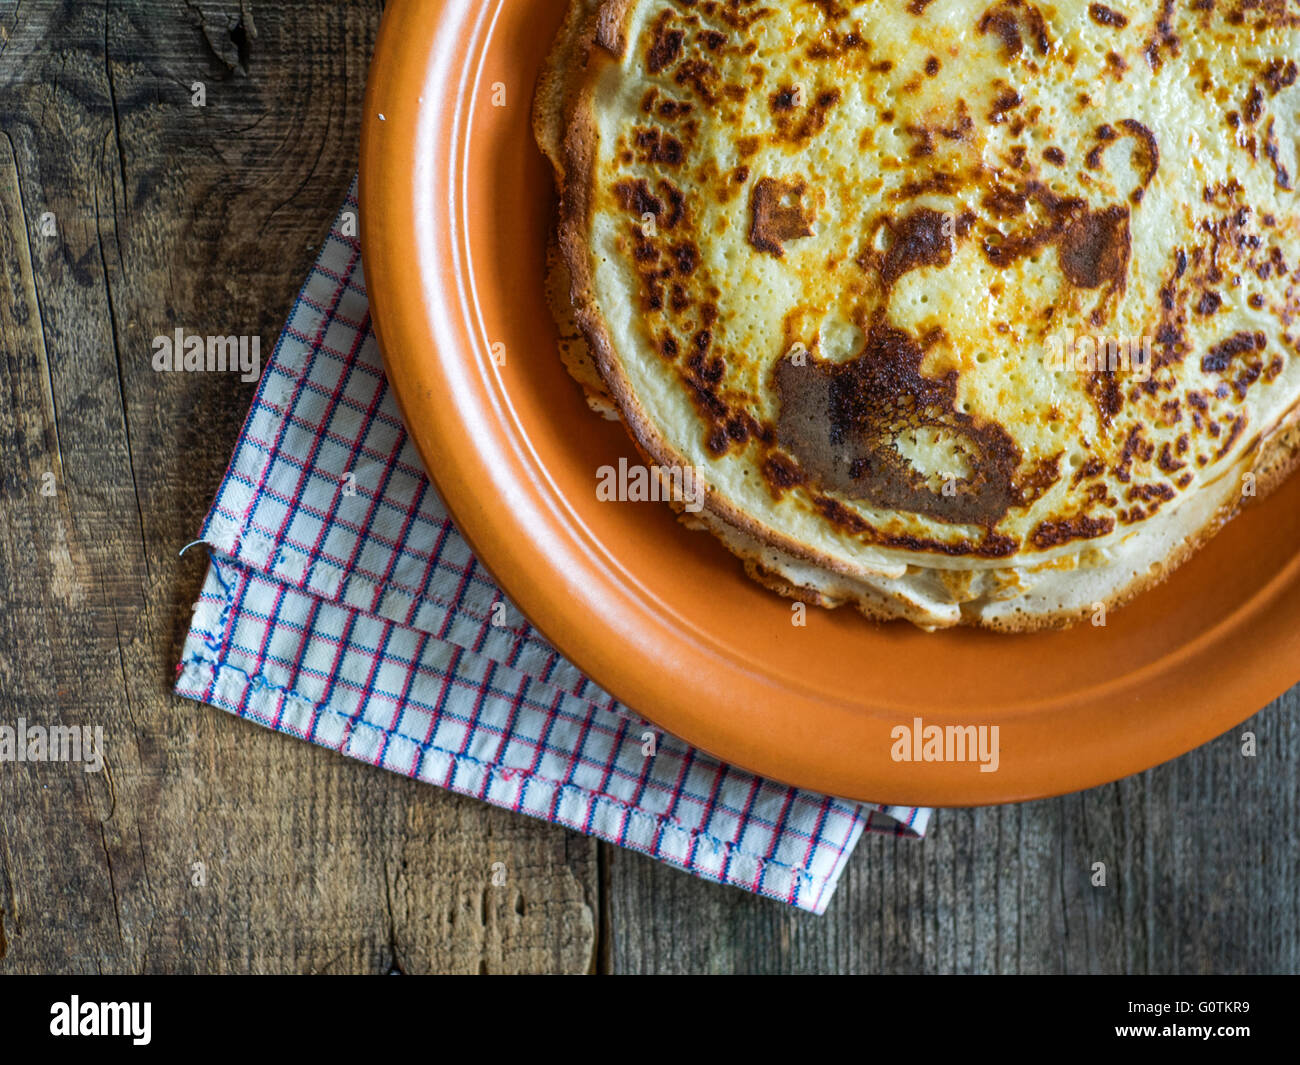 Stack of crepe pancakes on plate Stock Photo